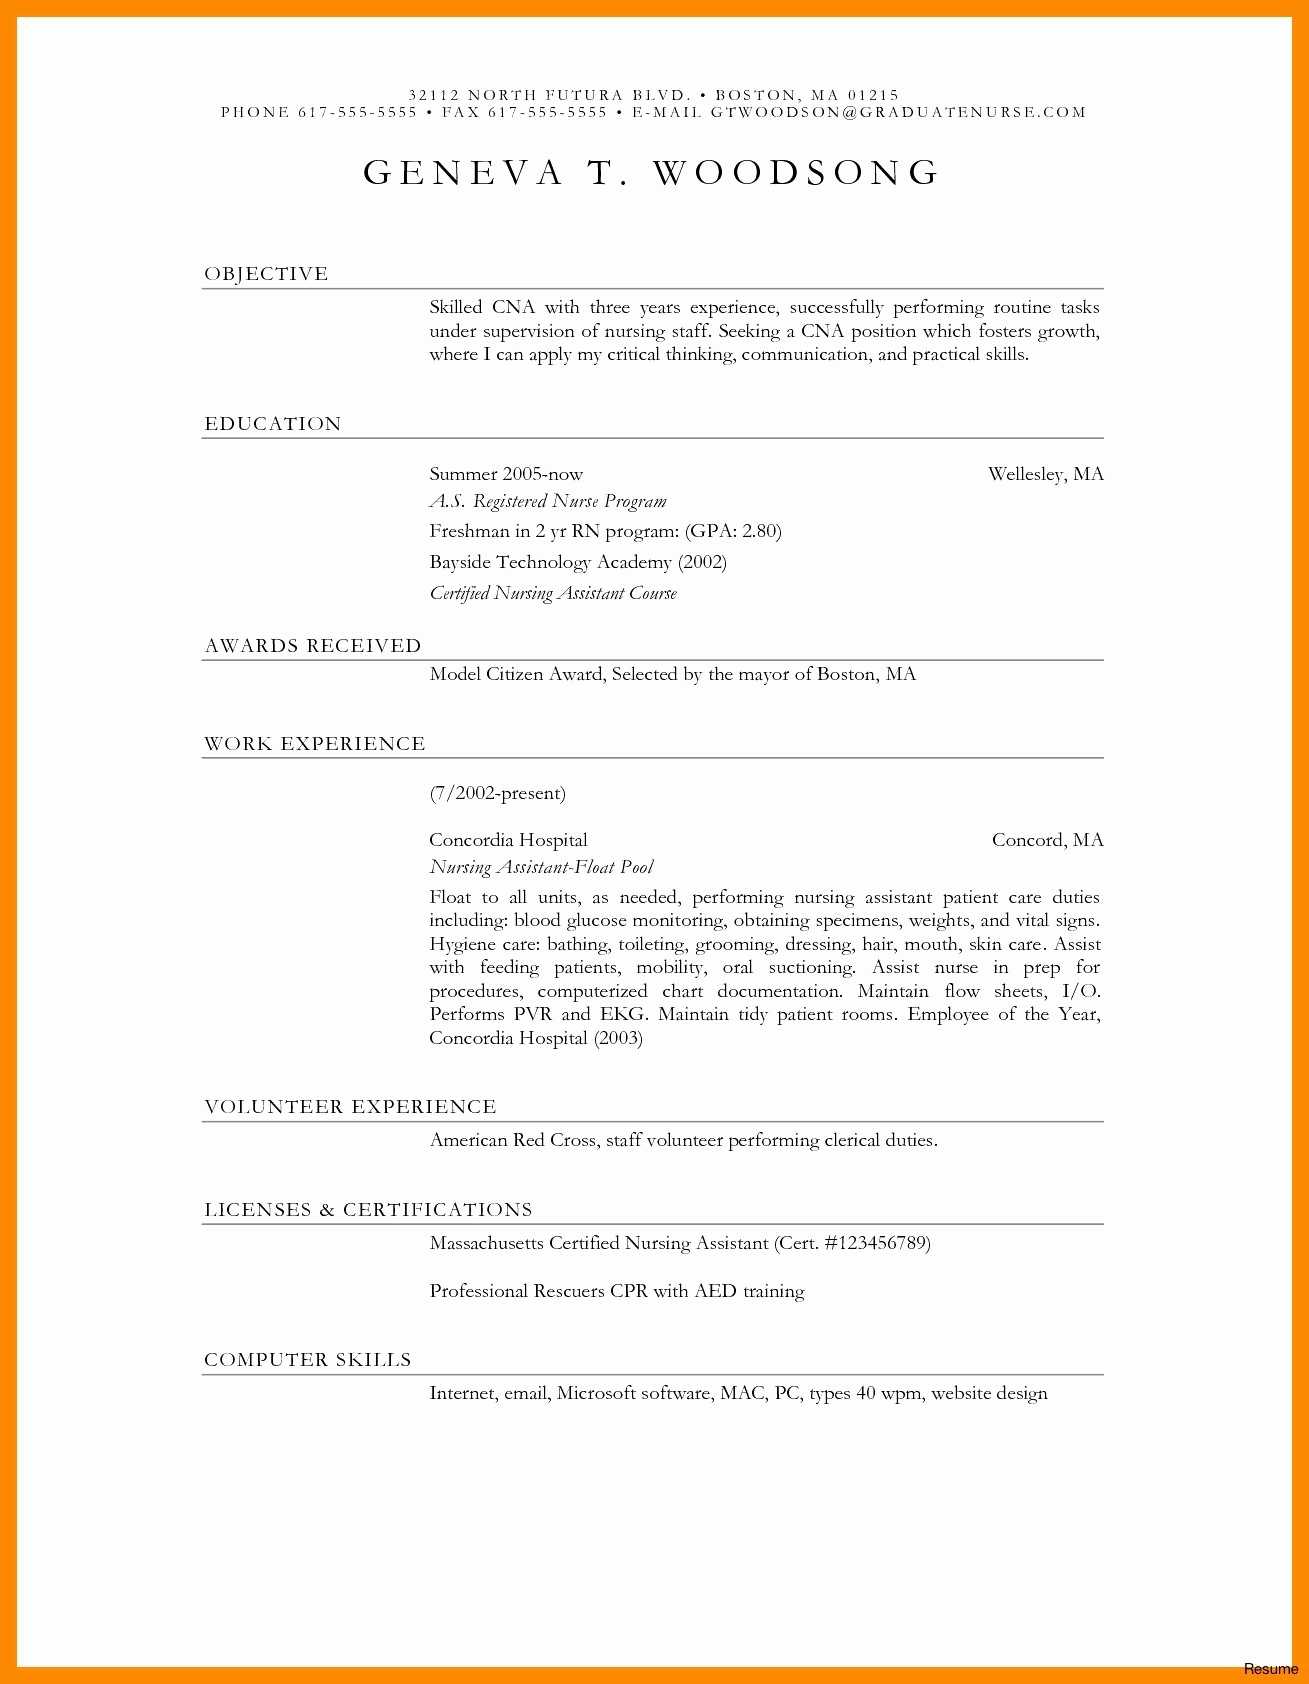 9 10 Booklet Template Word Download | Aikenexplorer With With Regard To Bookplate Templates For Word